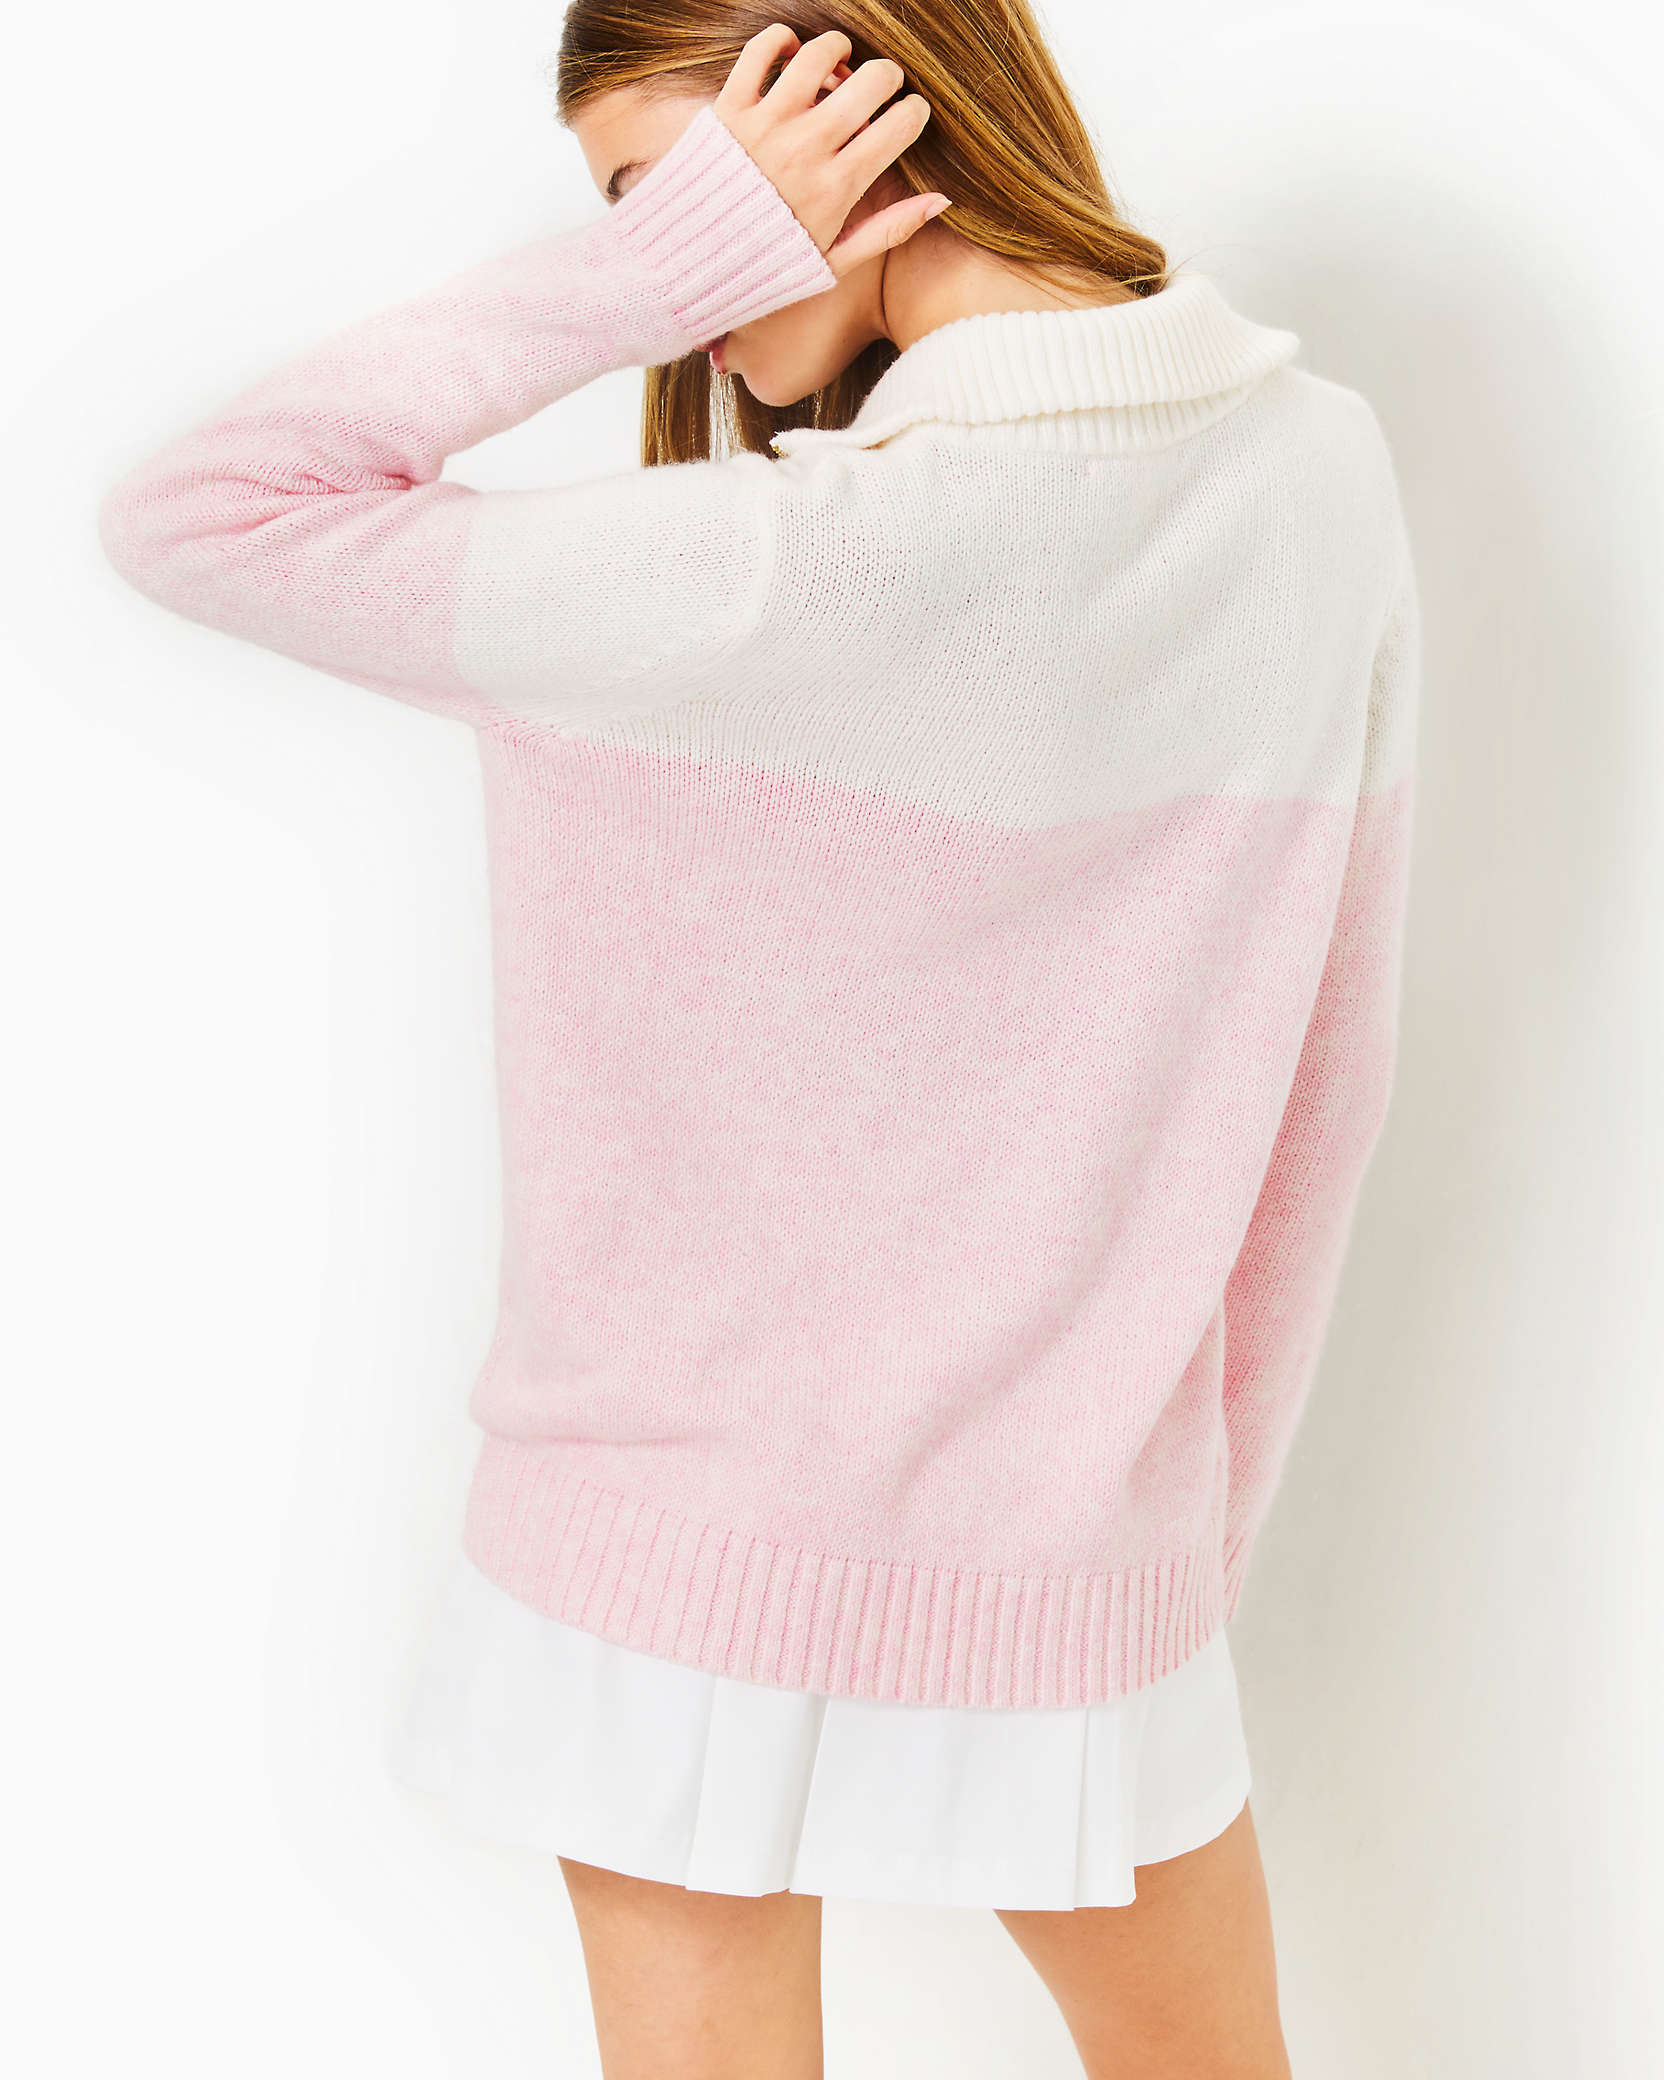 Shop Lilly Pulitzer Dorset Collared Sweater In Pastel Confetti Pink On The Court Colorblock